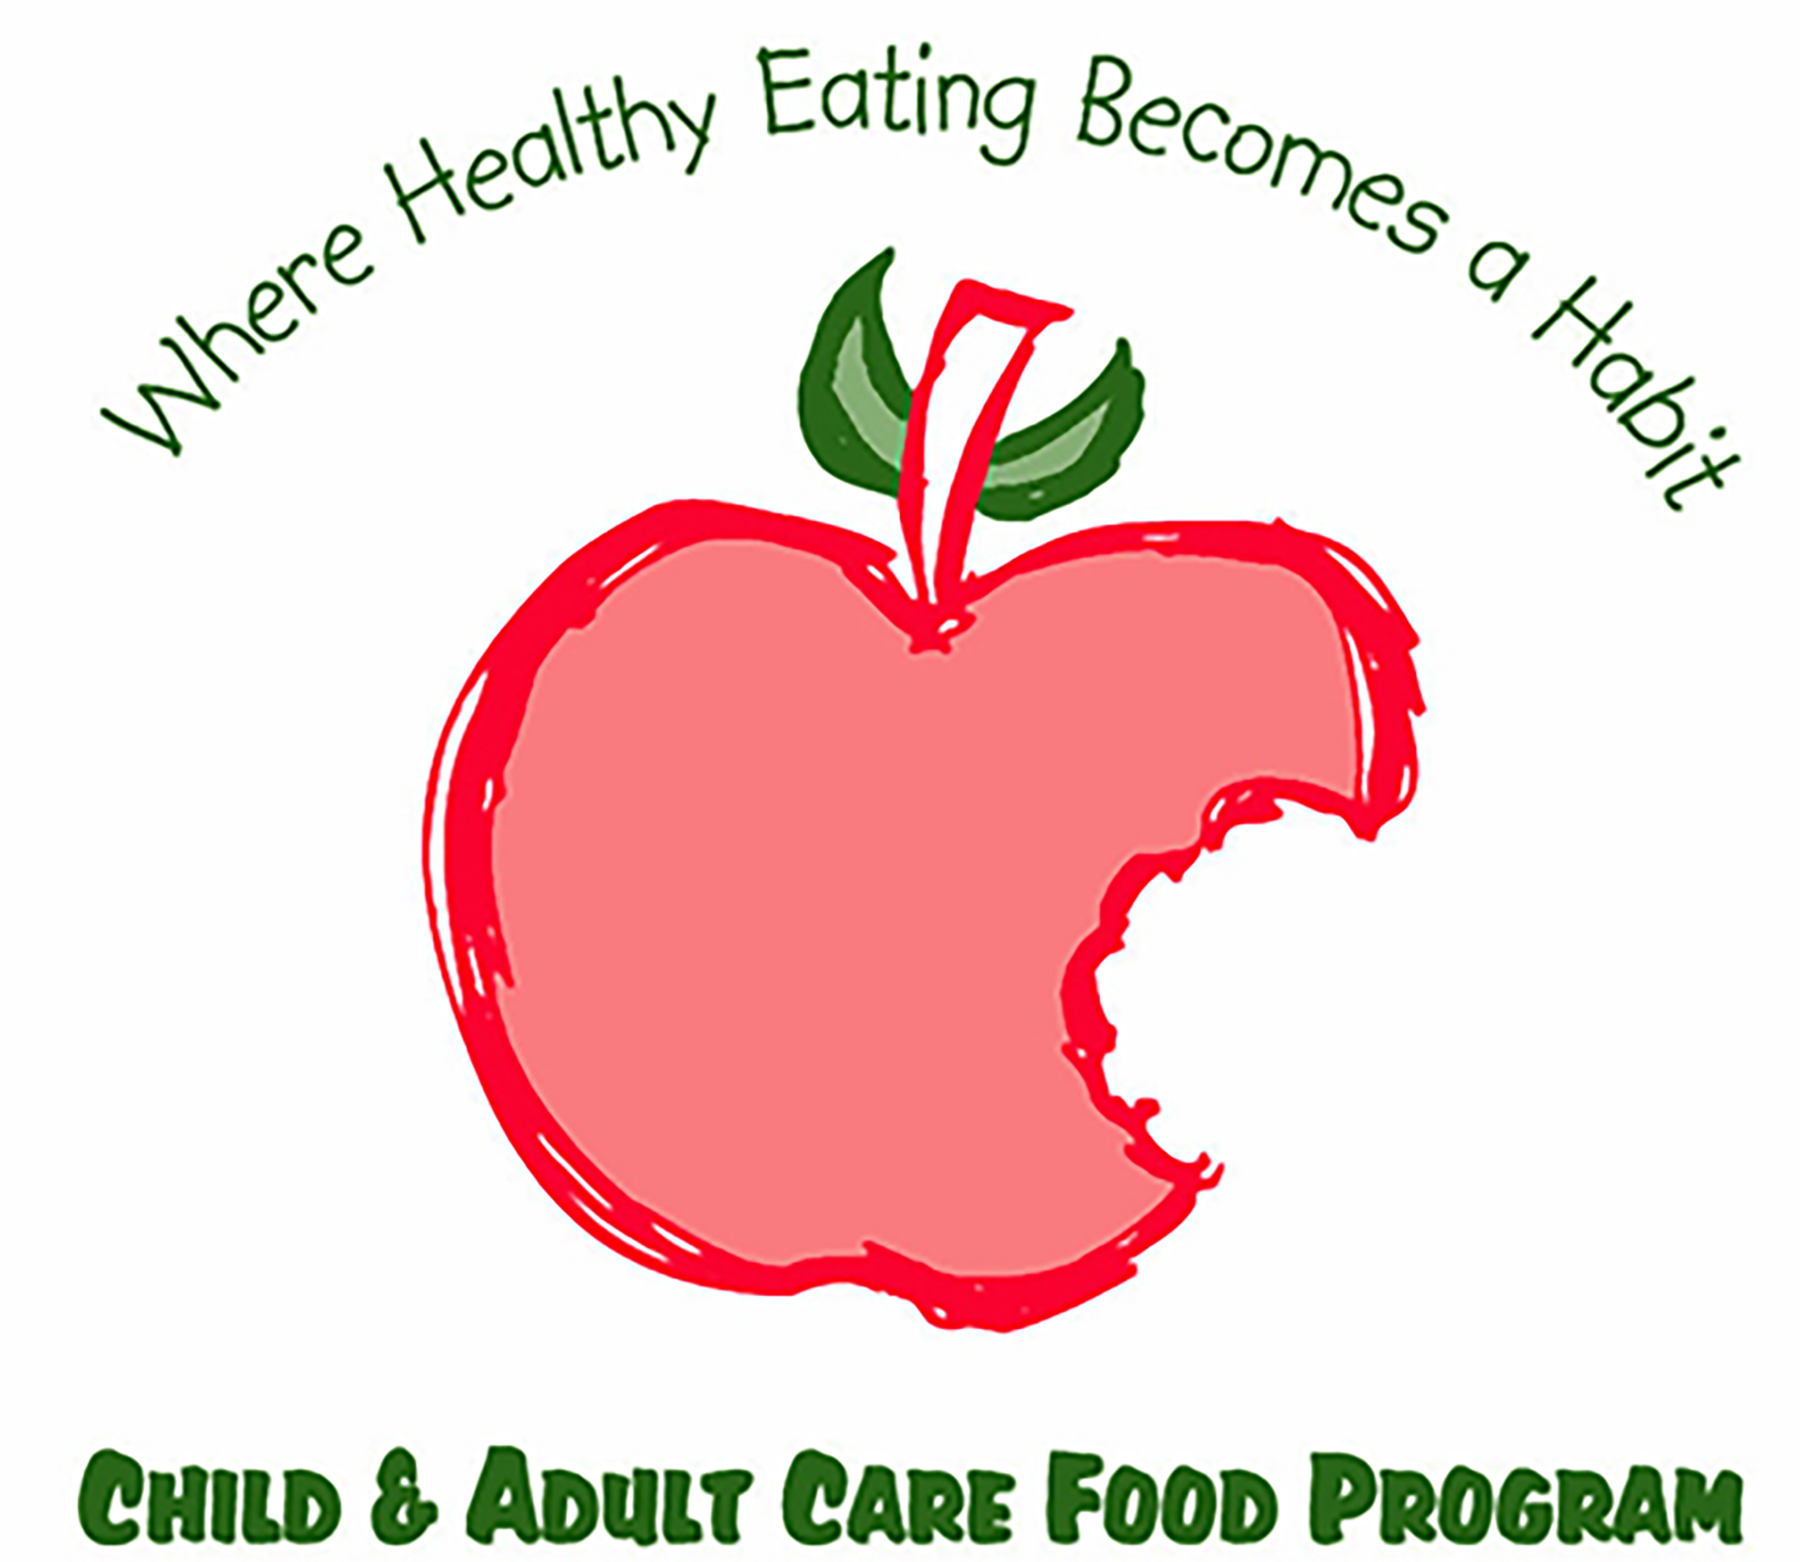 Child and Adult Care Food Program logo of apple with a bite mark